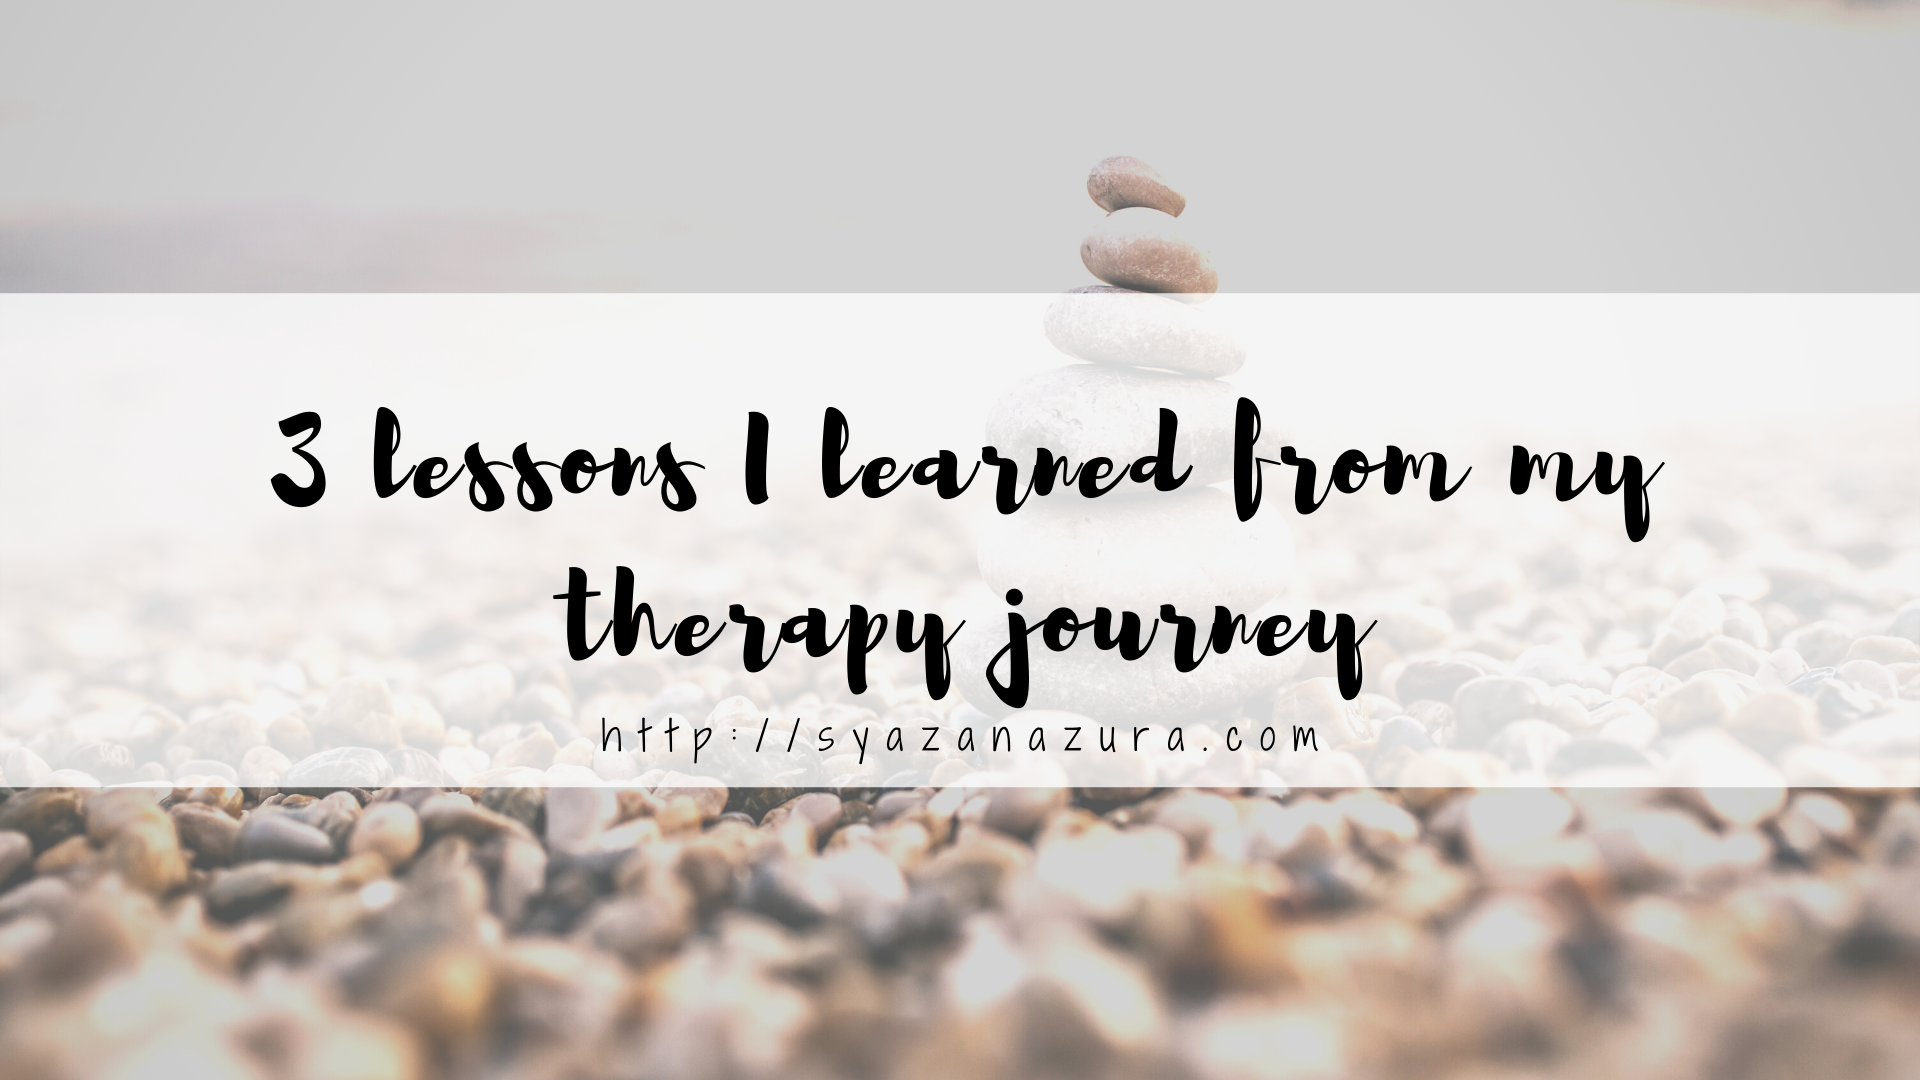 3 lessons I learned from my therapy journey.